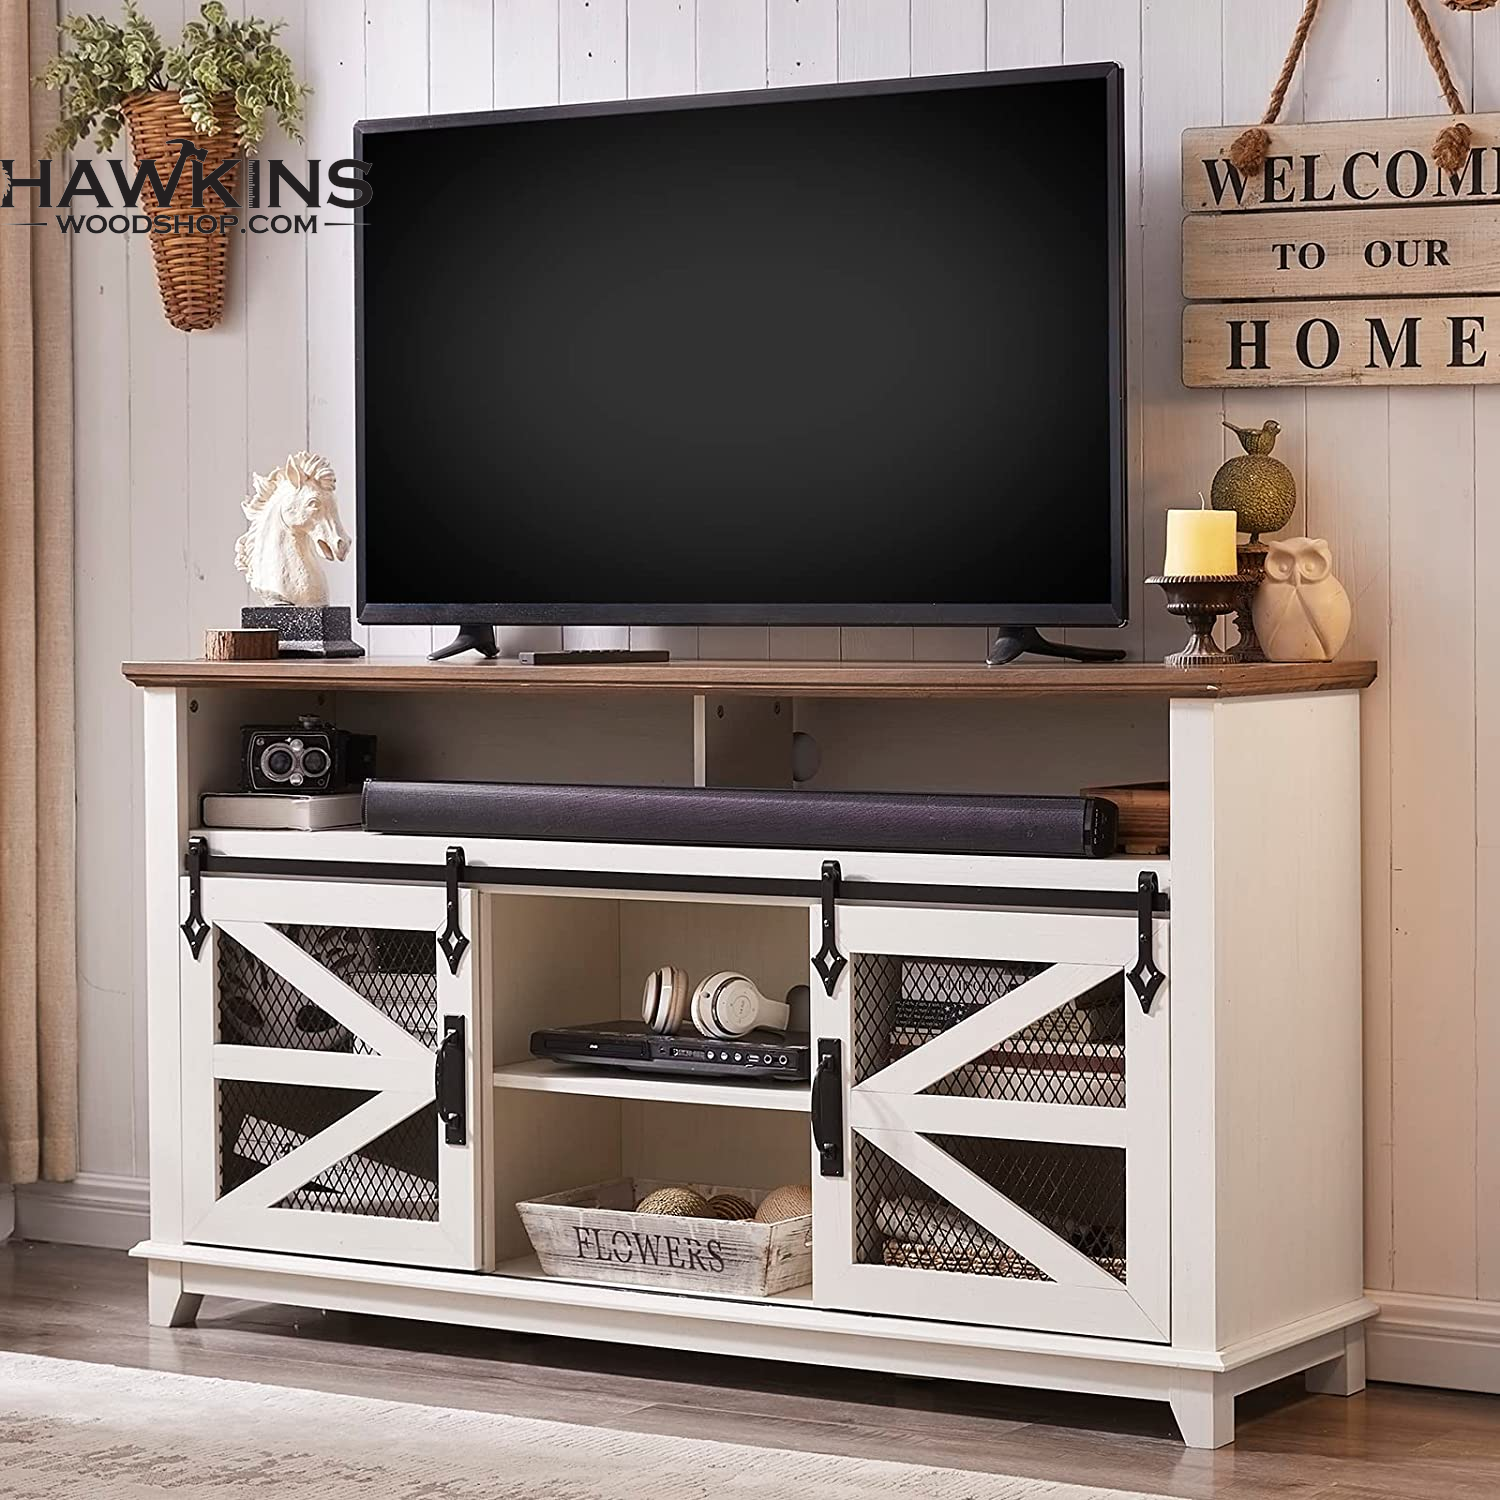 Sliding Barn Door Tv Stand, Industrial, Modern Media Entertainment Center W/Sliding  Barn Door, Rustic Tv Console Cabinet, Adjustable Shelves, Antique White –  Built To Order, Made In Usa, Custom Furniture – Free Within Barn Door Media Tv Stands (View 8 of 15)